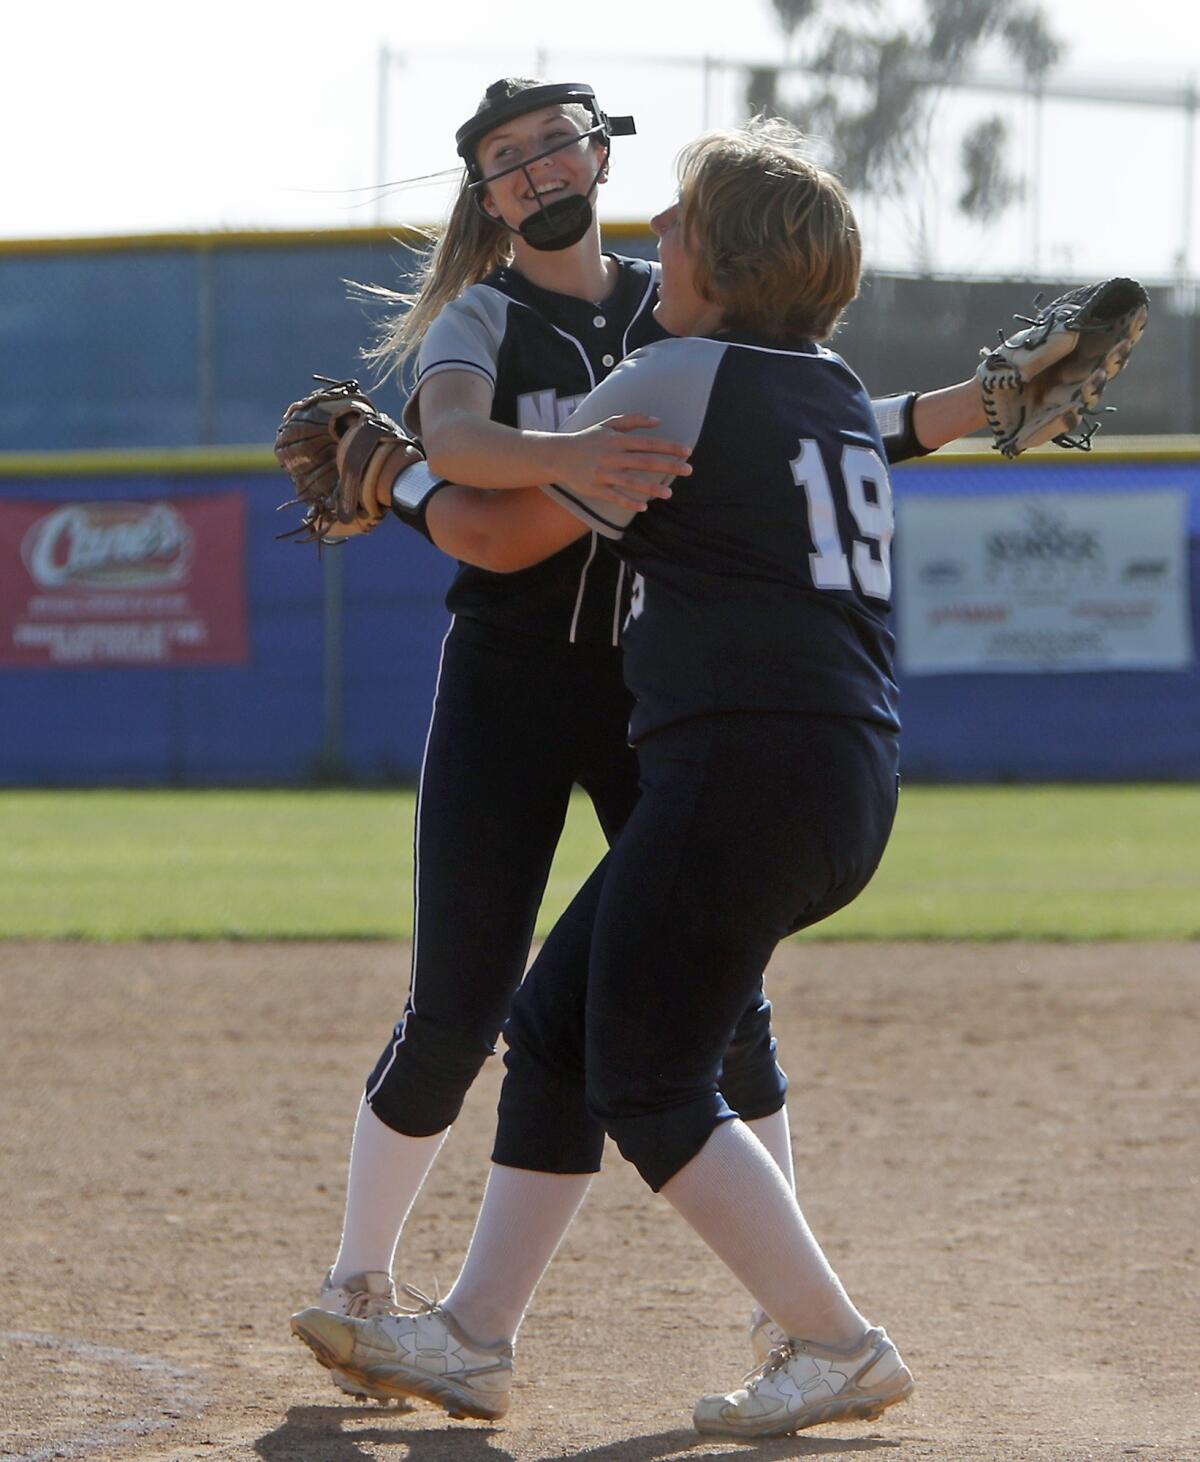 Newport Harbor High starting pitcher Clare Austin, right, shares a hug with closer McKayla Cotton after the Sailors defeat Ocean View 3-2 in the first round of the CIF Southern Section Division 5 playoffs at home on Thursday.